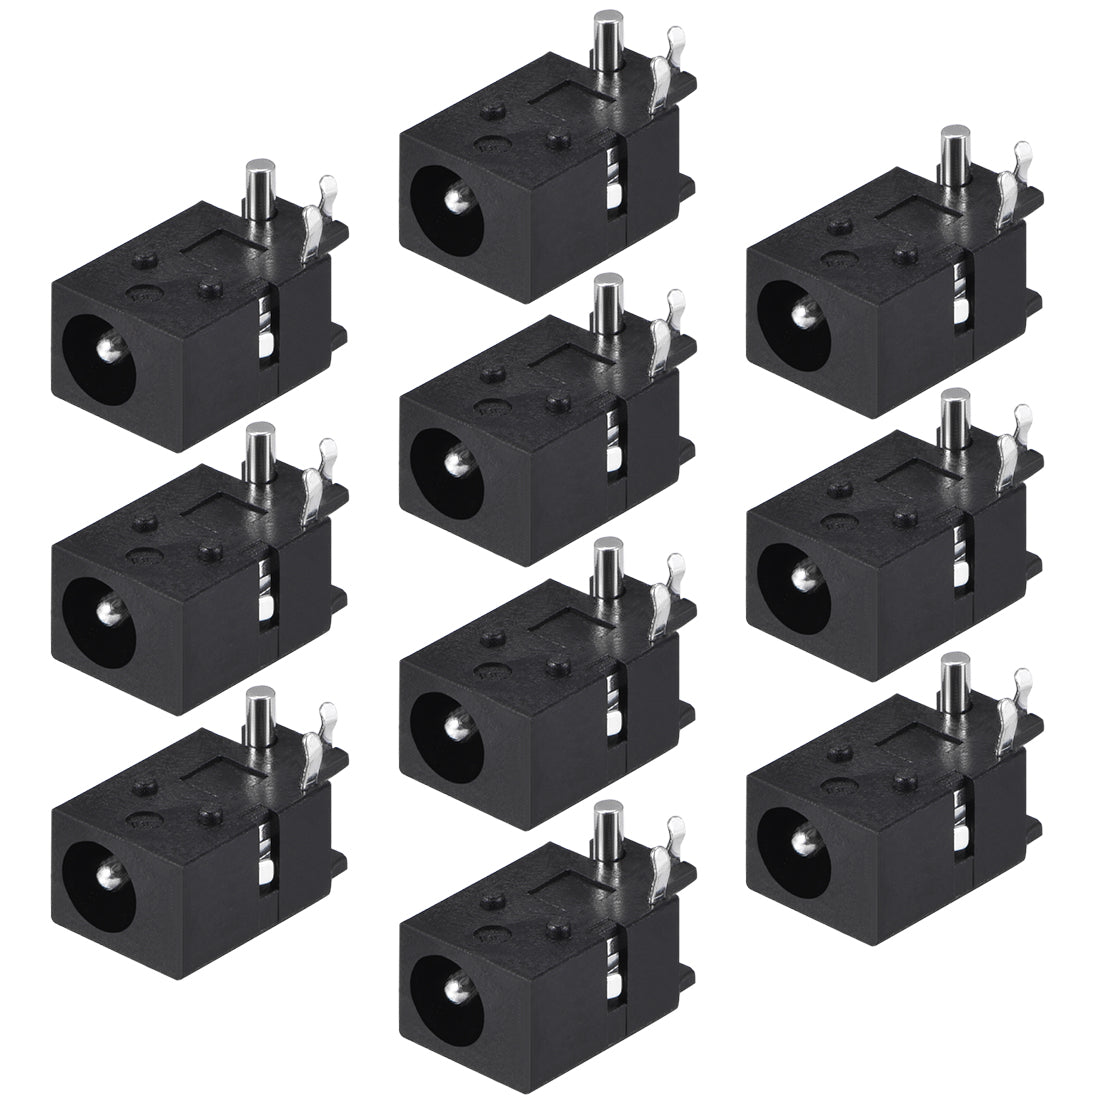 uxcell Uxcell PCB Mount 4.0mm x 1.7mm 3 Pin Audio Video DC Power Connector Socket DC023 Black 10Pcs